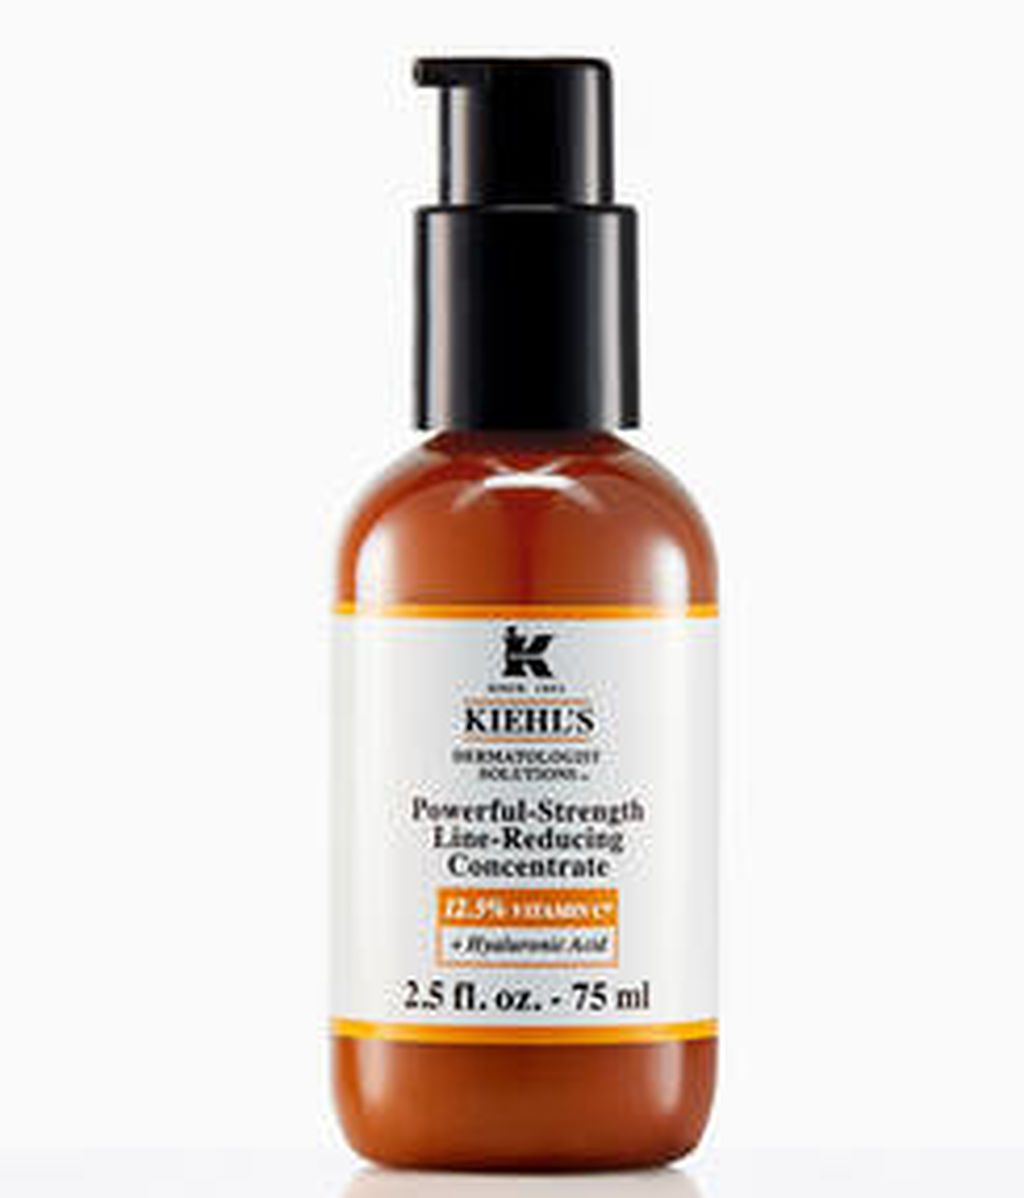 Powerful_Strength_Line_Reducing_Concentrate_applicator02-KIEHLS